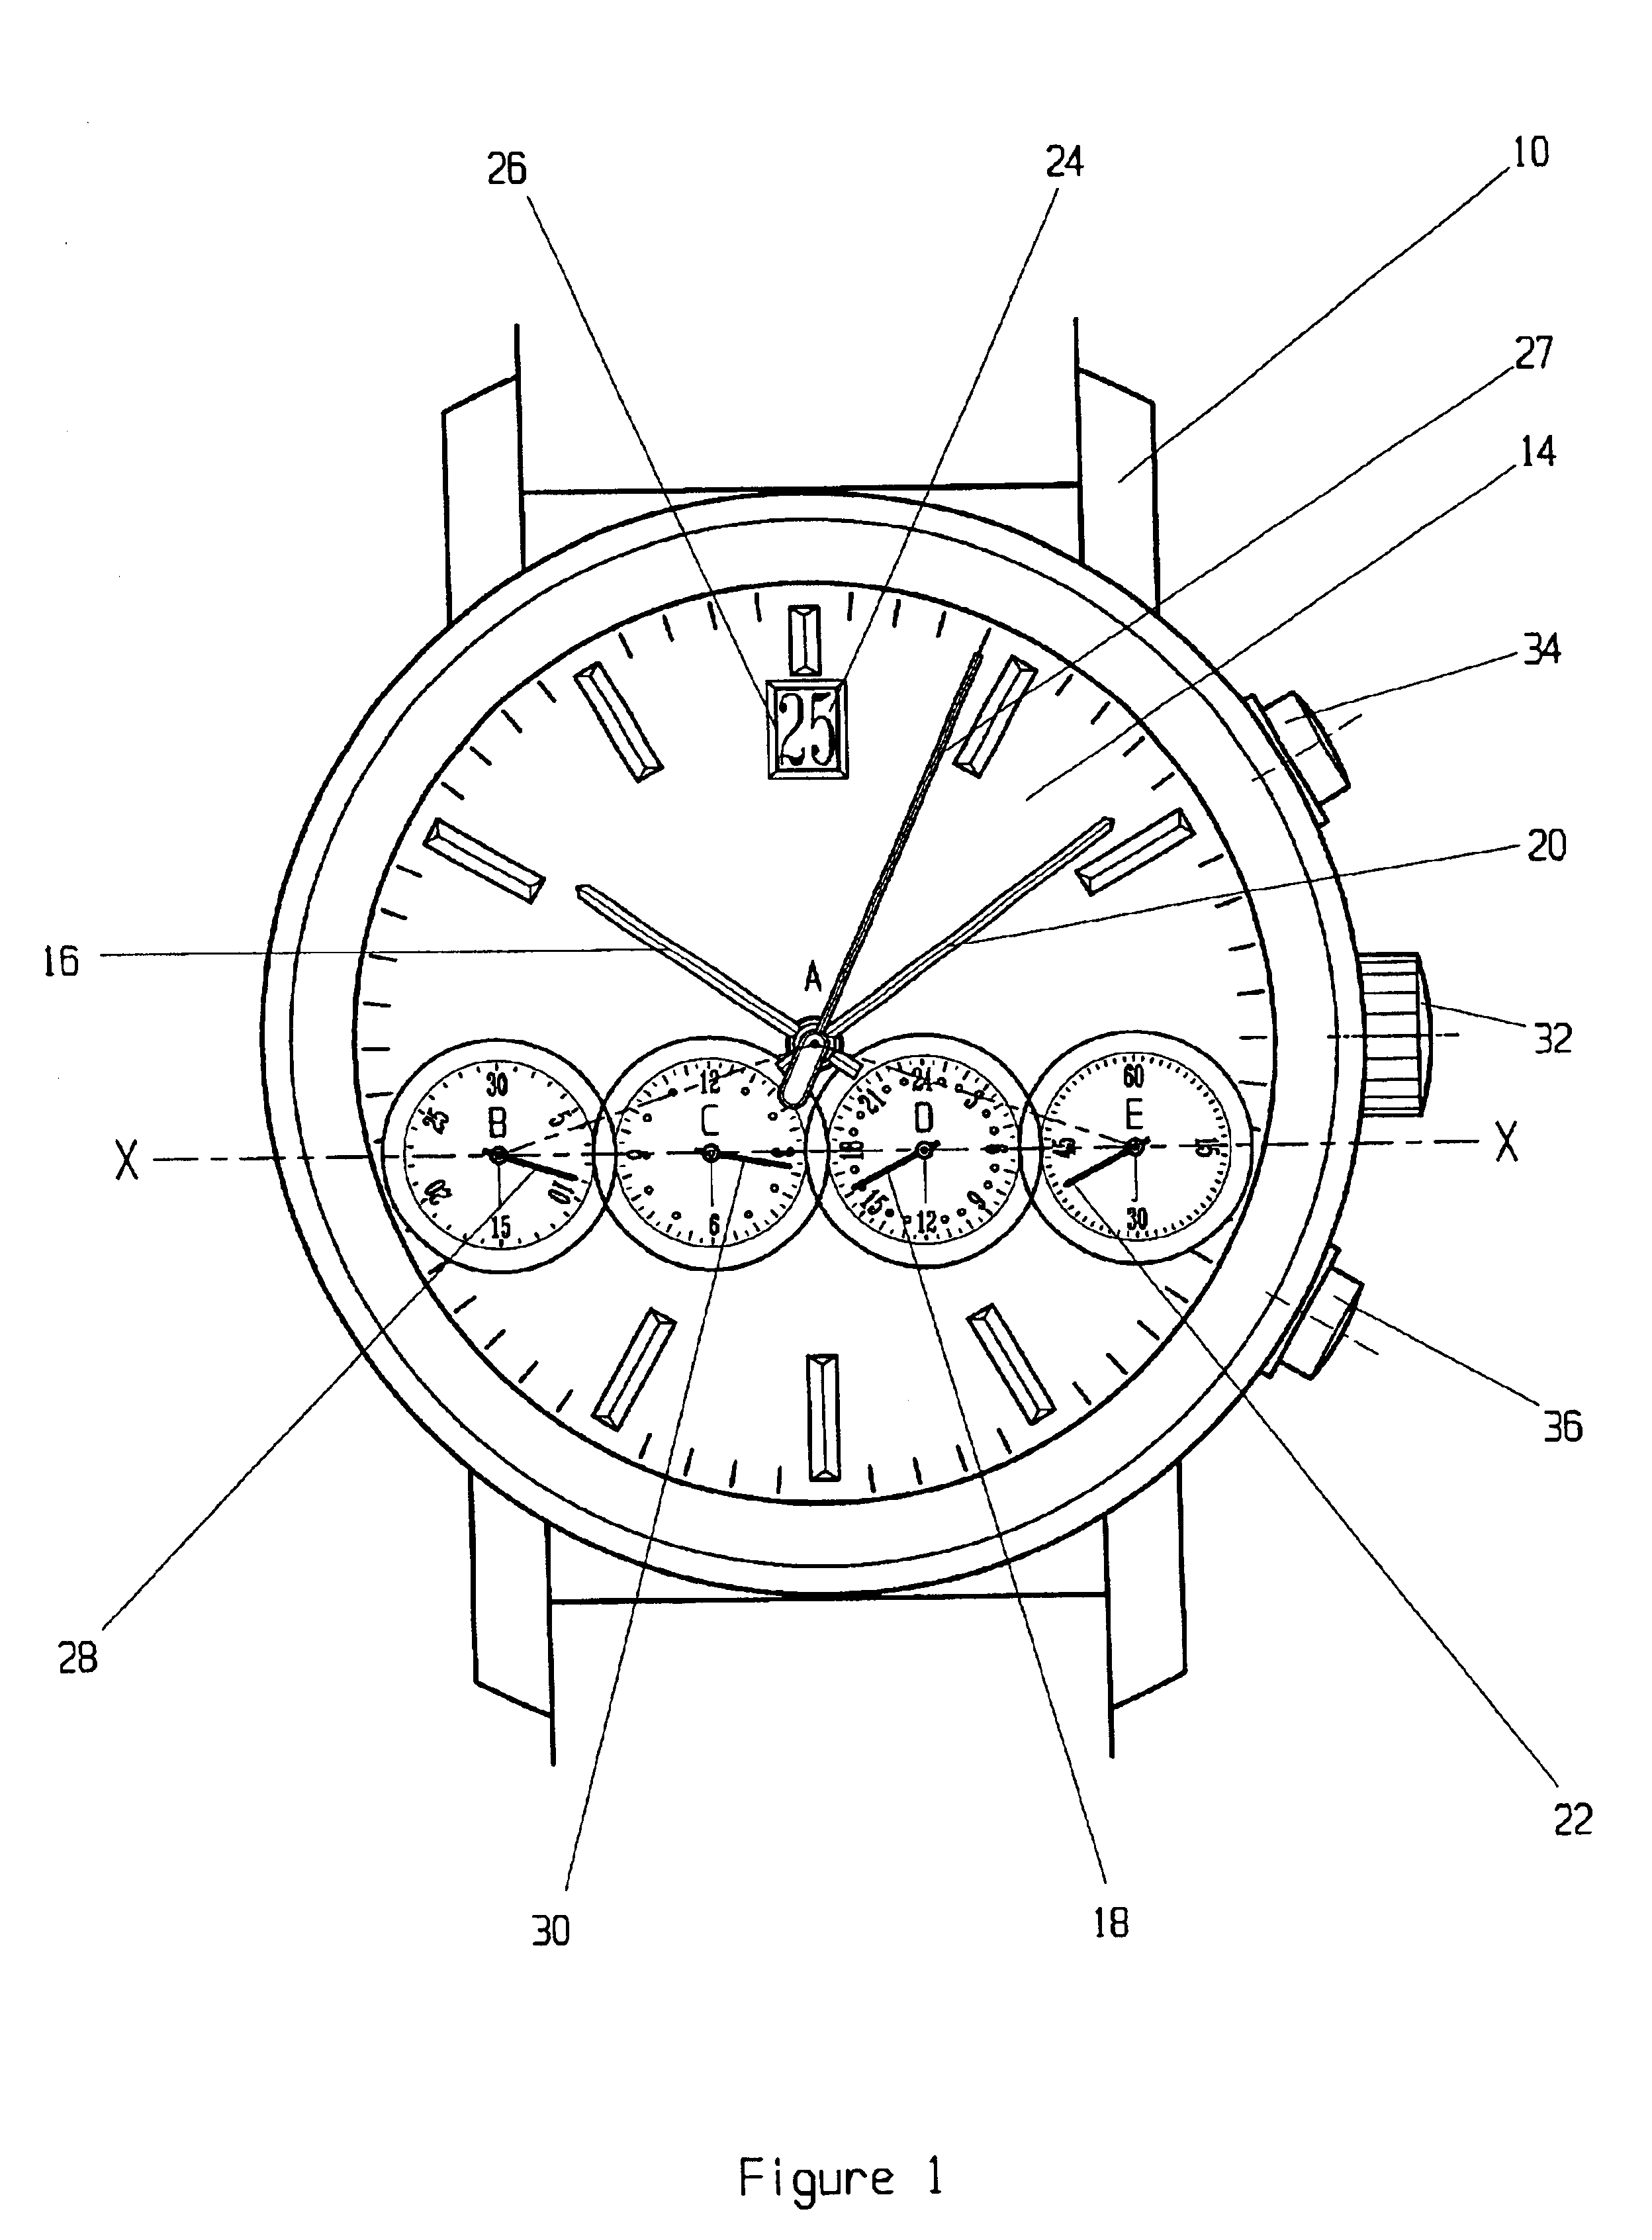 Watch movement with hand display